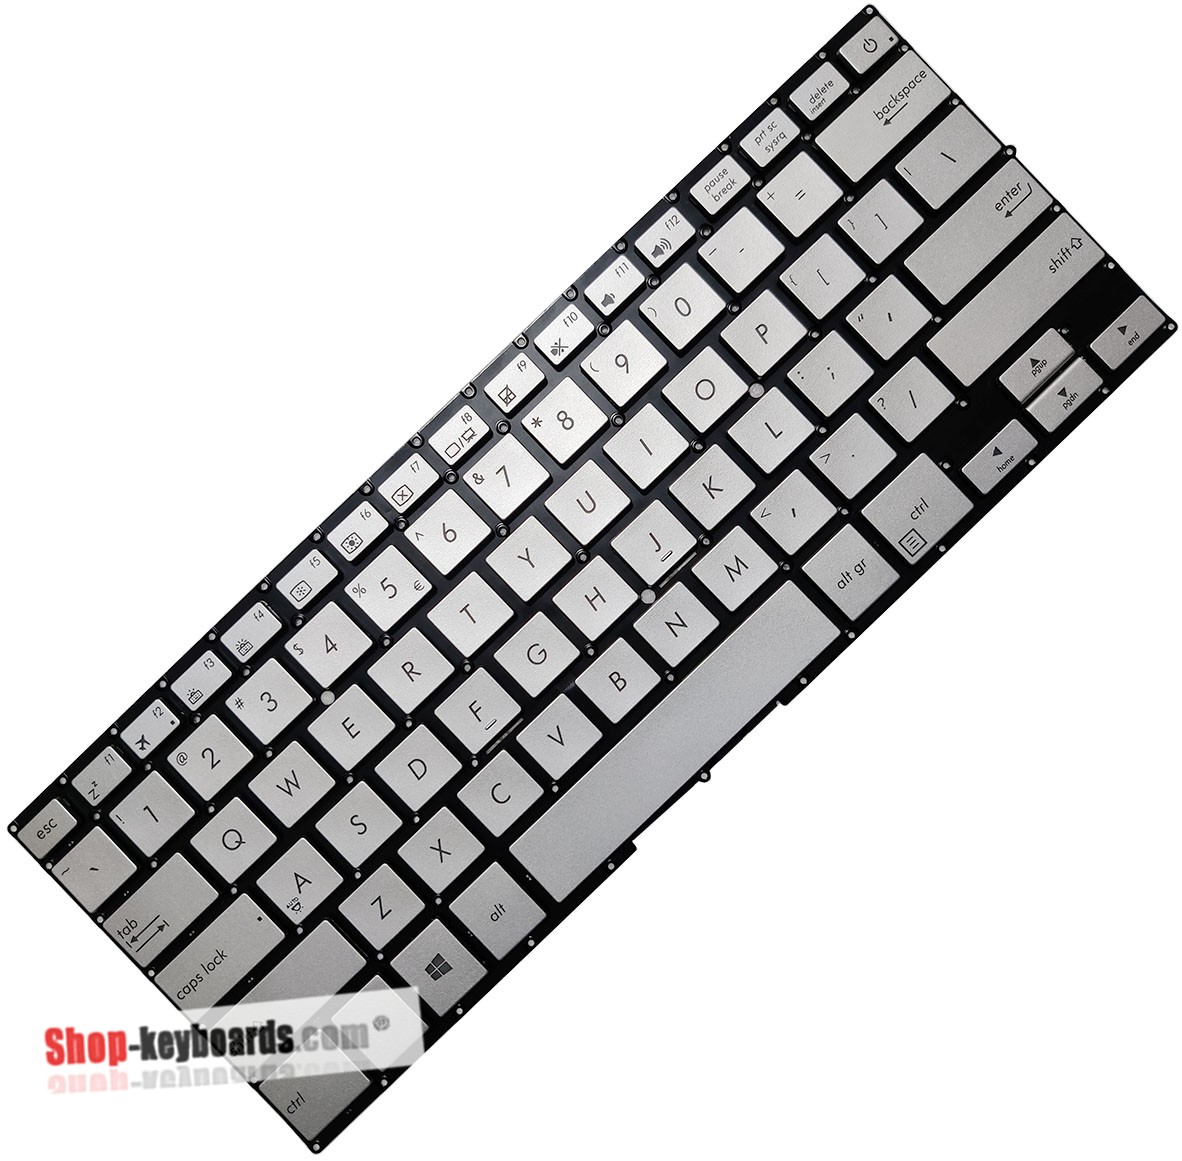 Asus 0KNB0-D620FR00 Keyboard replacement